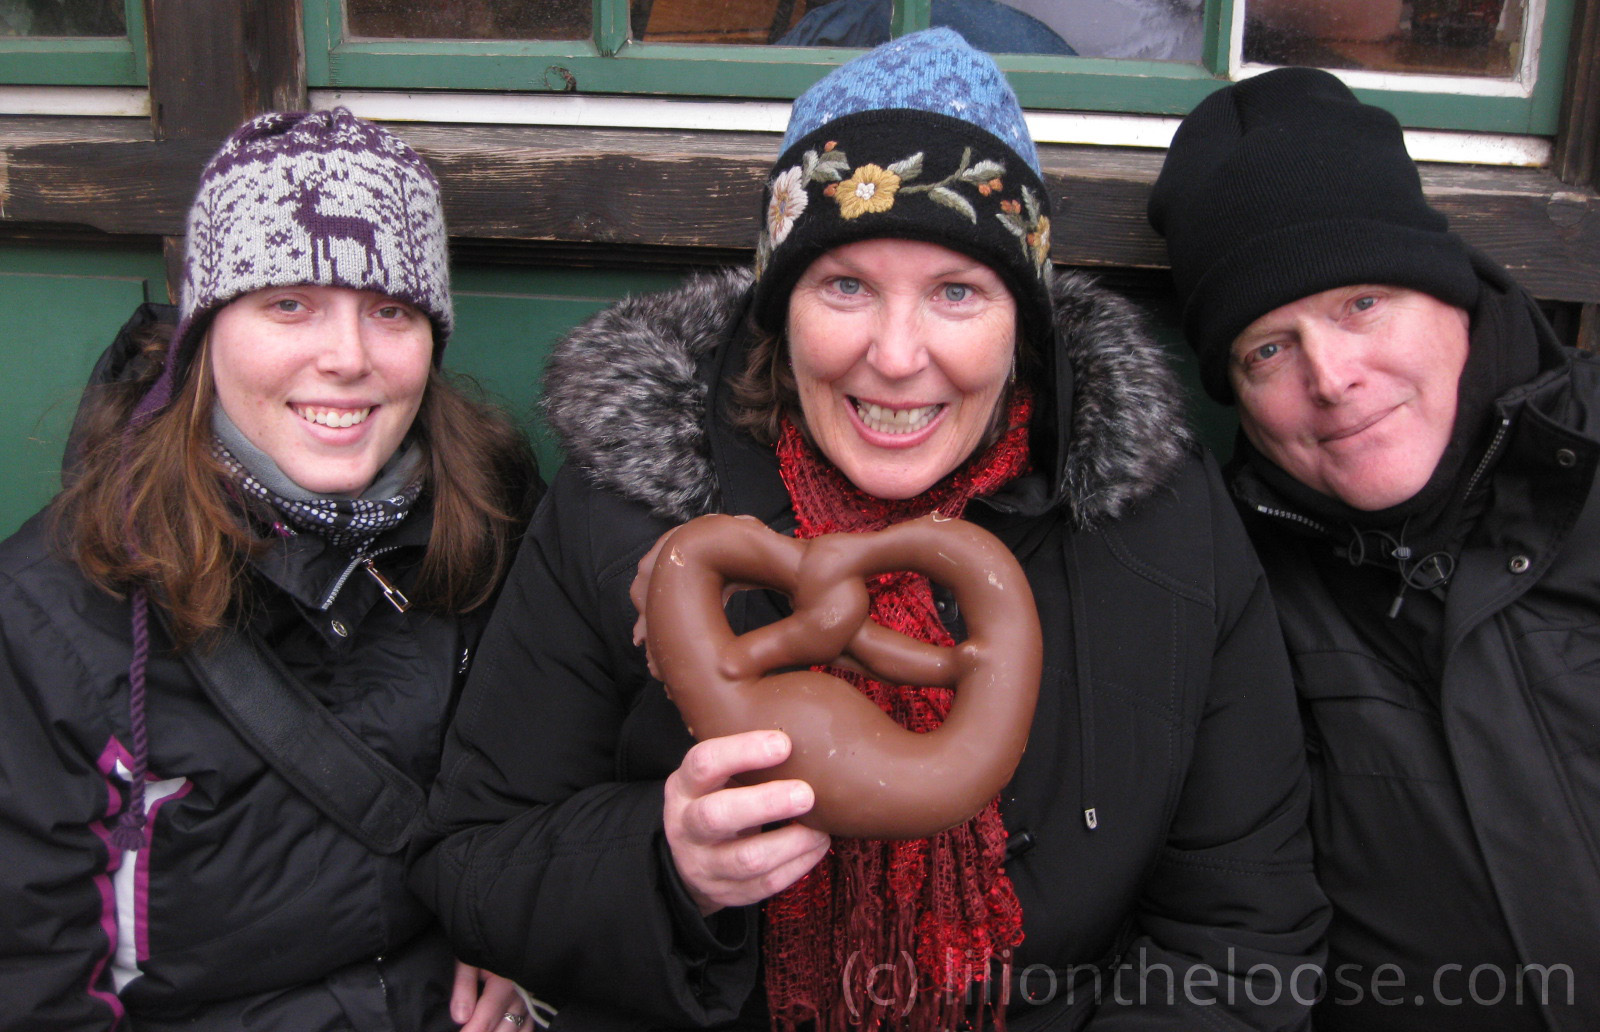 Myself, my mother, and father about to enjoy a huge milk-chocolate pretzel.